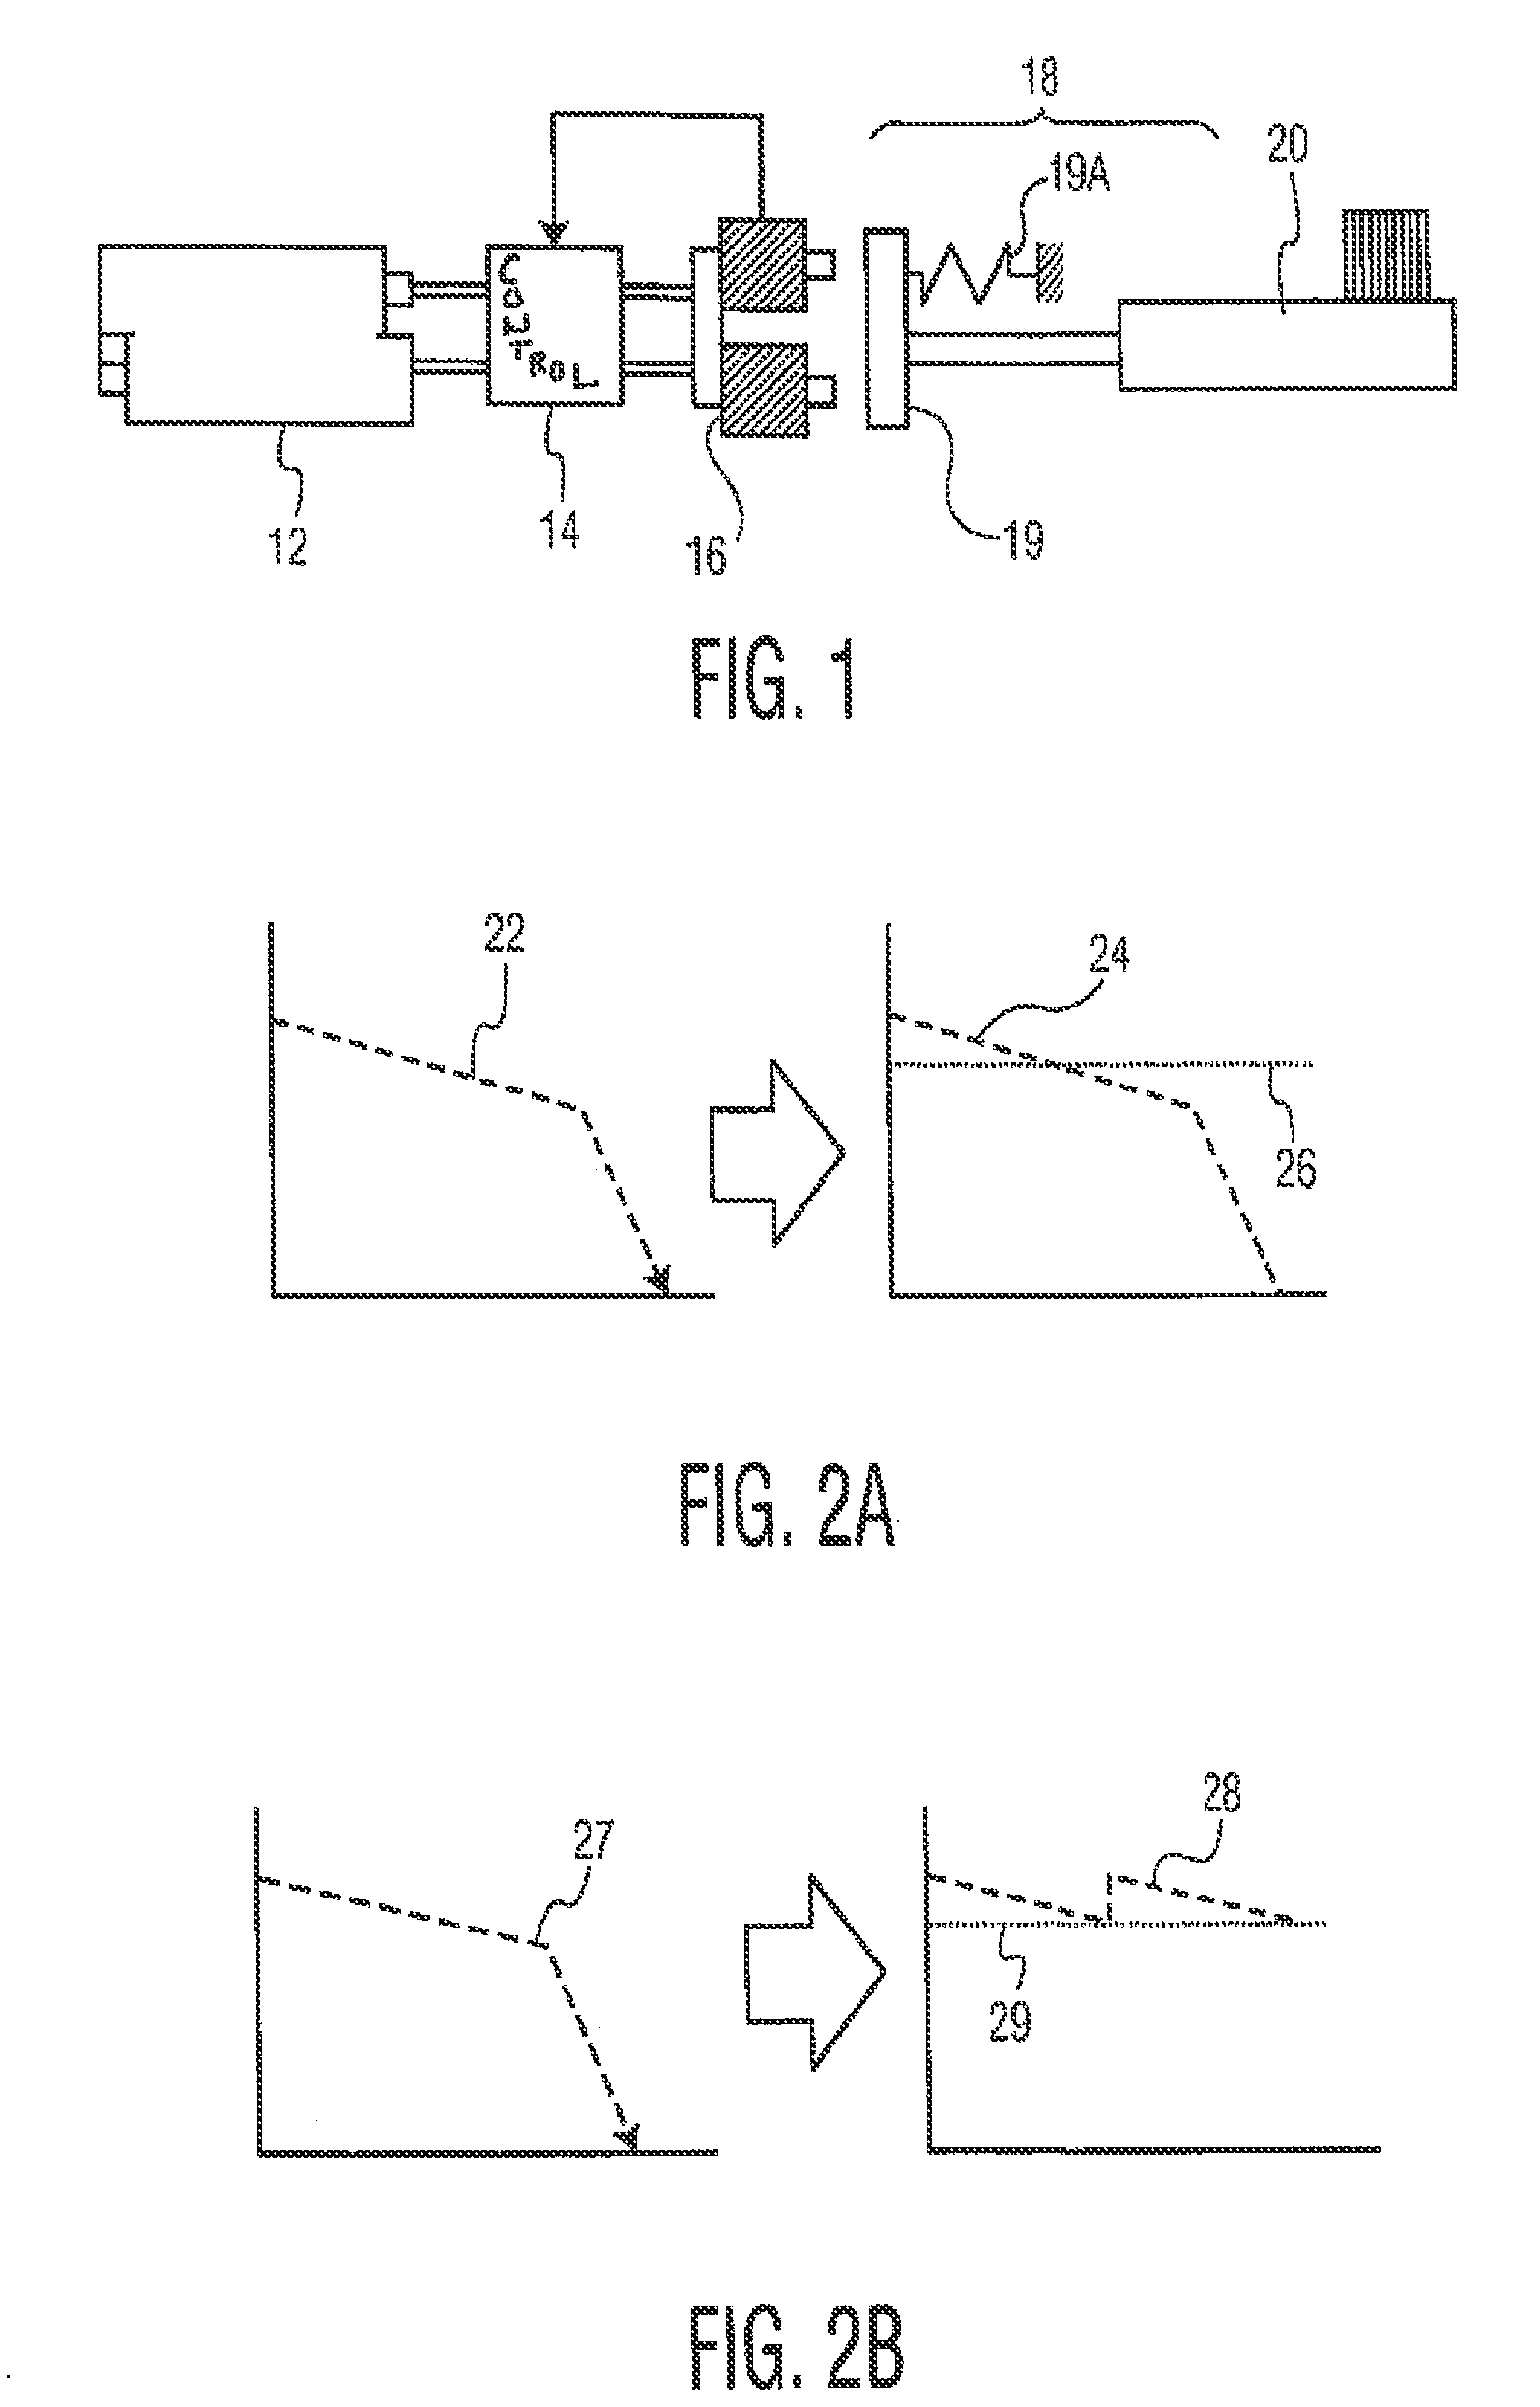 System and method for maintaining performance of battery-operated toothbrushes